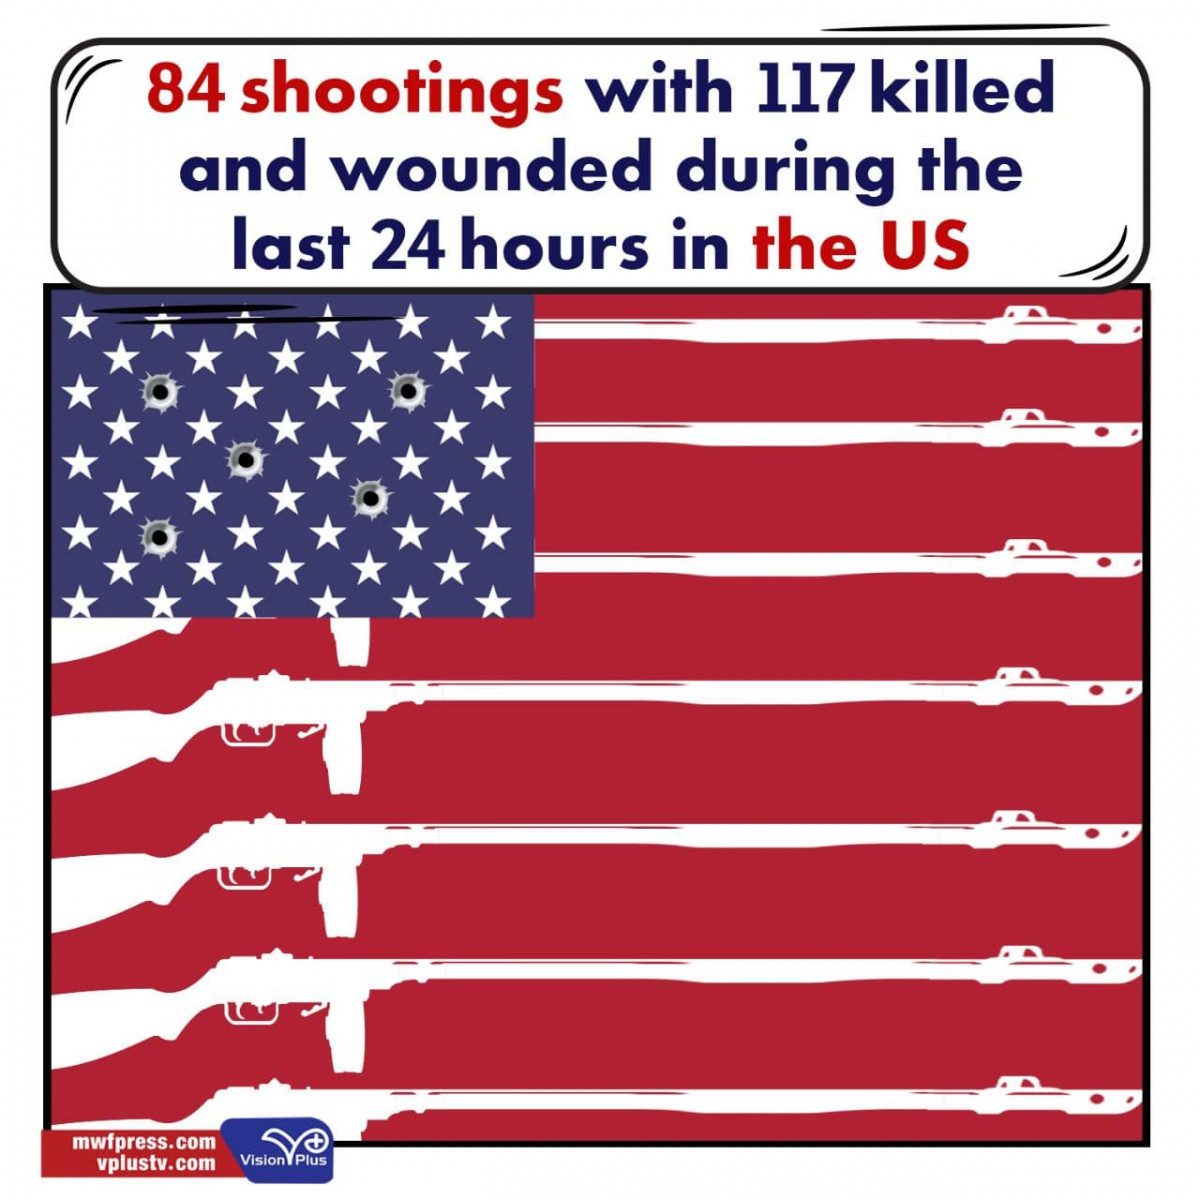 84 shootings with 117 killed and wounded during the last 24 hours in the US